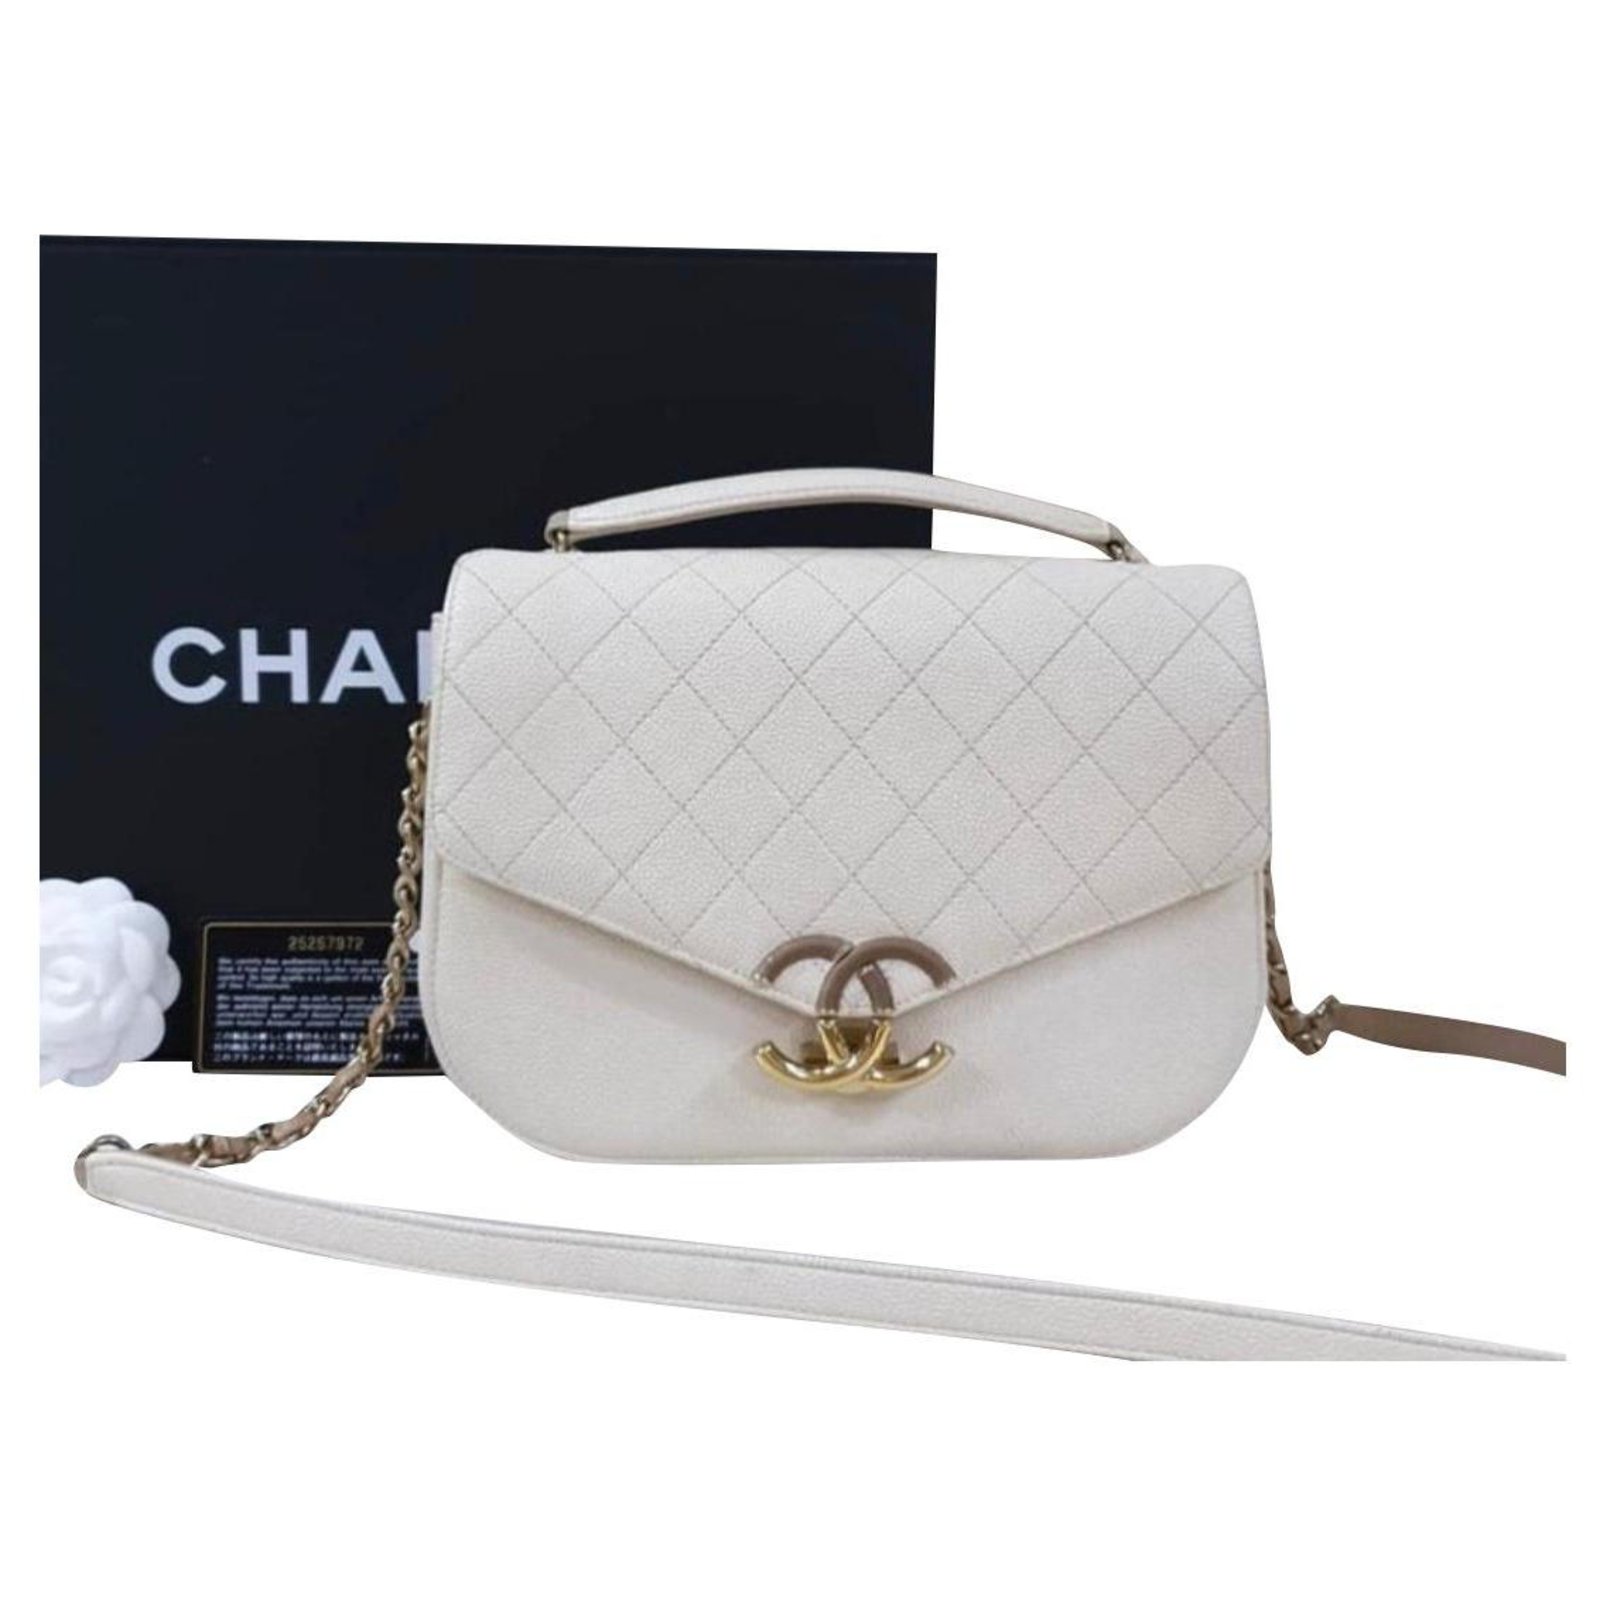 Chanel Grained Flap Bag with Top Handle New 2018 Ivory White calf